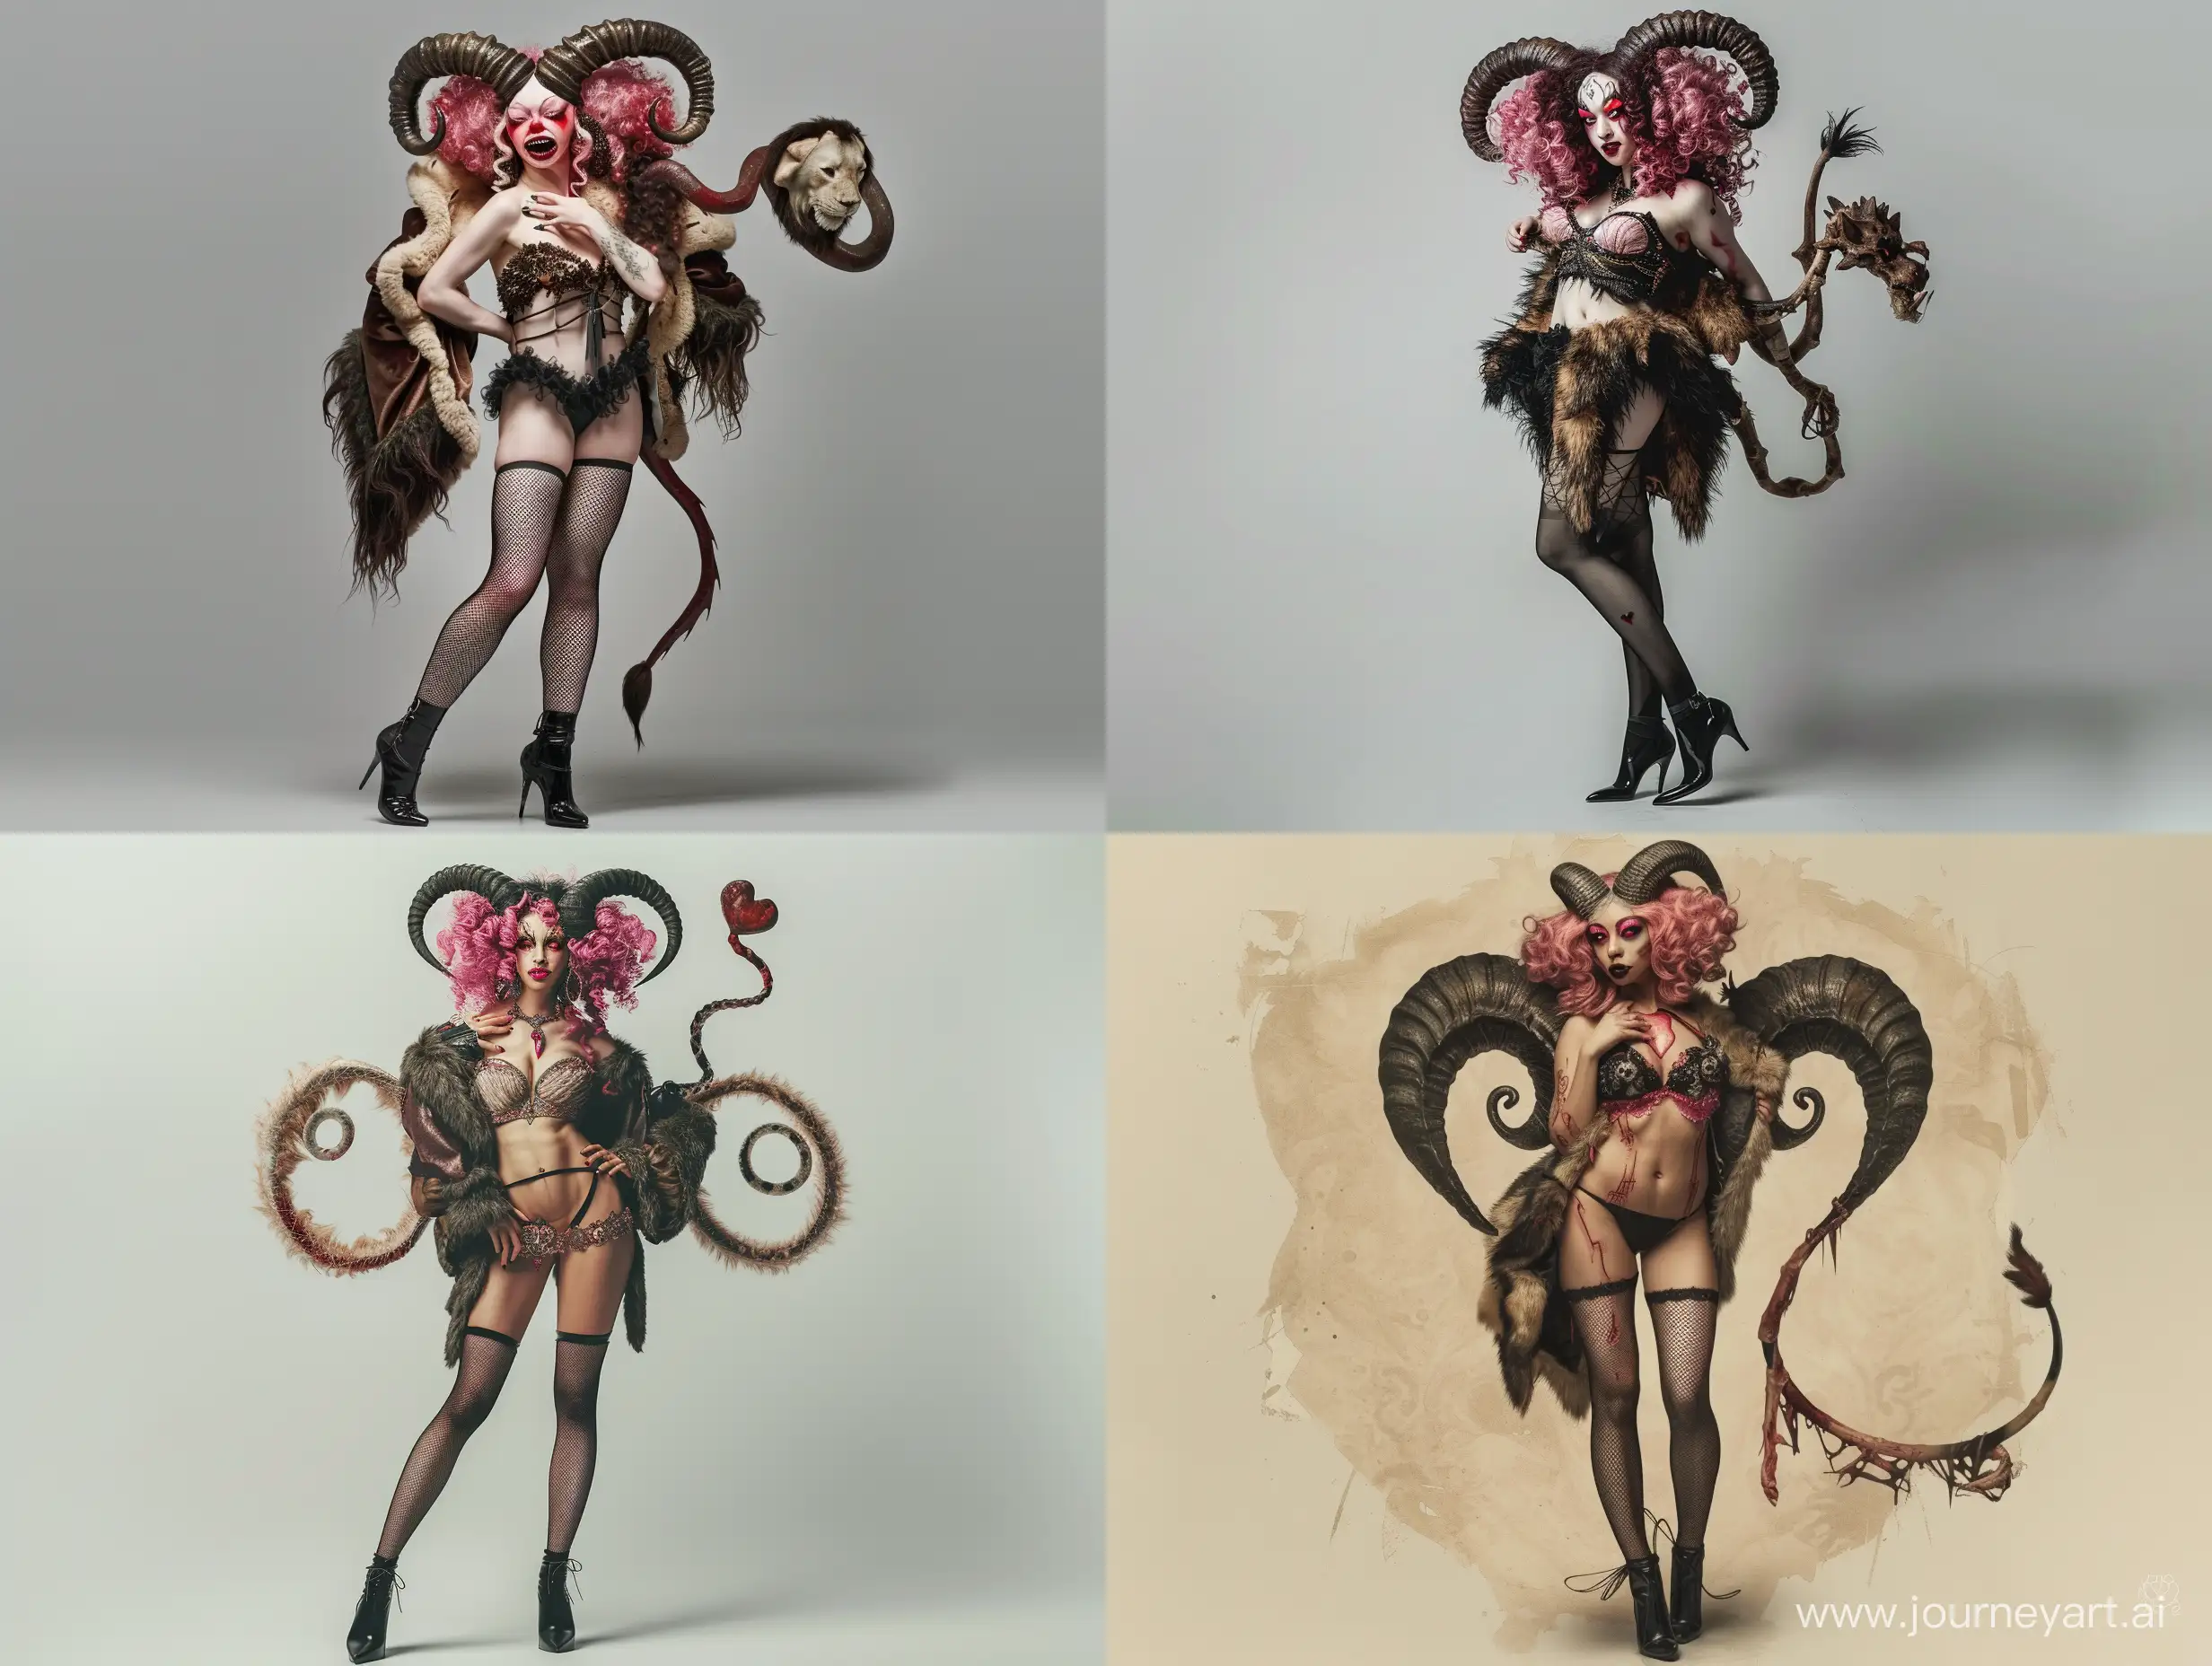 Female-Demon-Asmodeus-with-Twisted-Horns-and-Heartshaped-Tail-in-Fur-Coat-and-Fishnet-Stockings